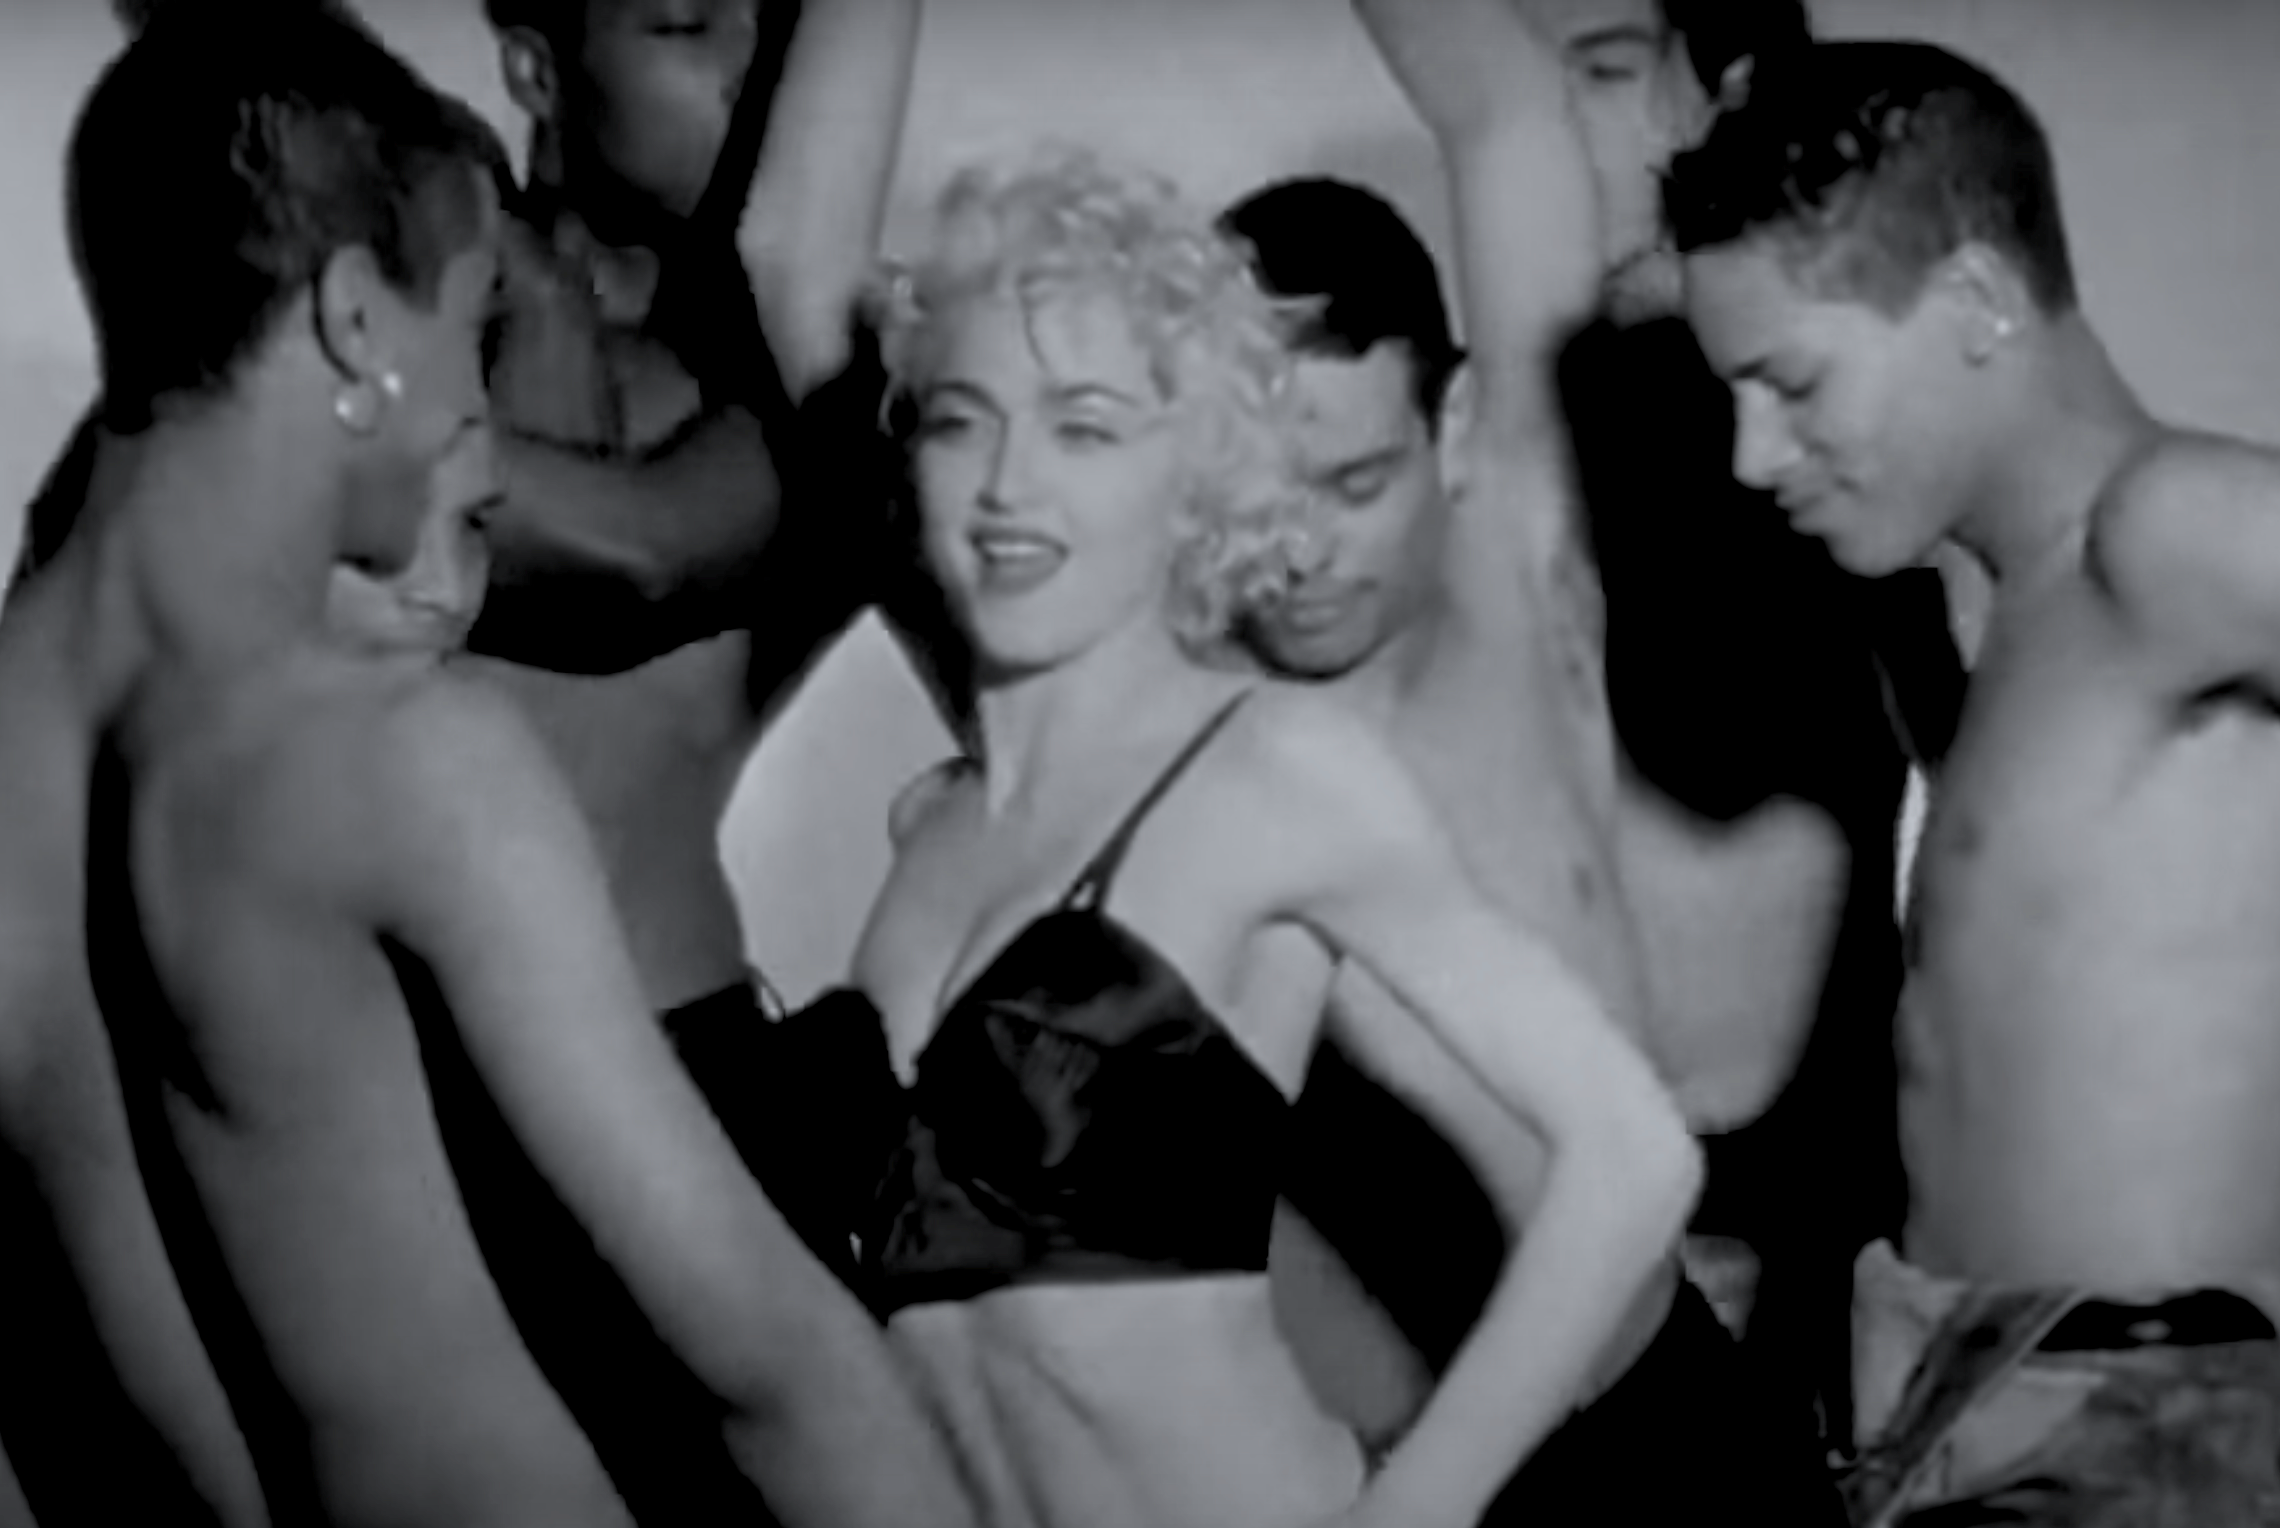 Examining the Politics of Madonnas Truth or Dare, 30 Years Later KQED pic